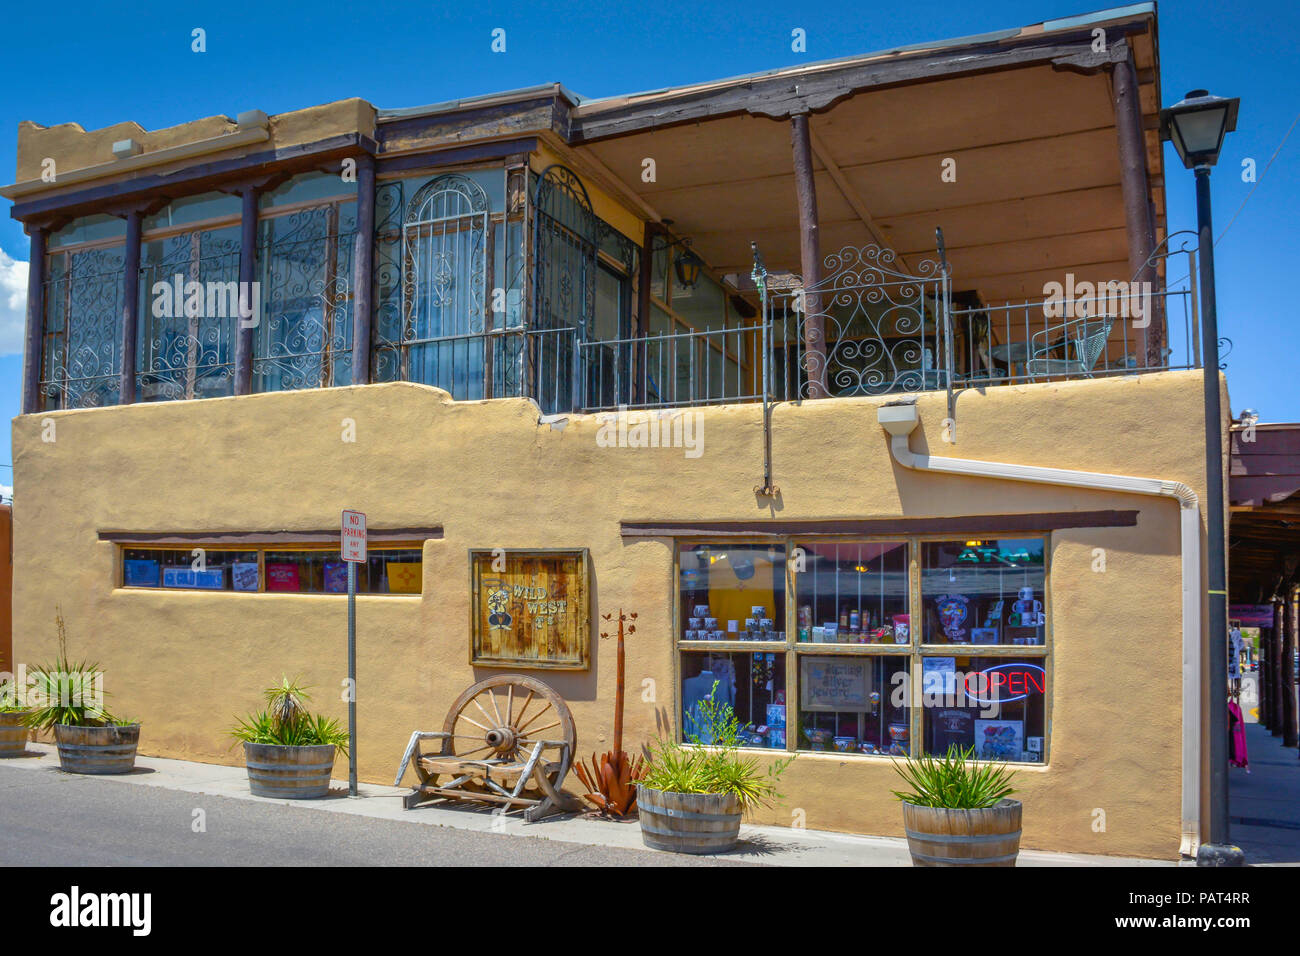 An old and unusual adobe building with a balcony and decorative wrought iron houes the Wild West T's & Gifts  in old town Albuquerque, NM Stock Photo